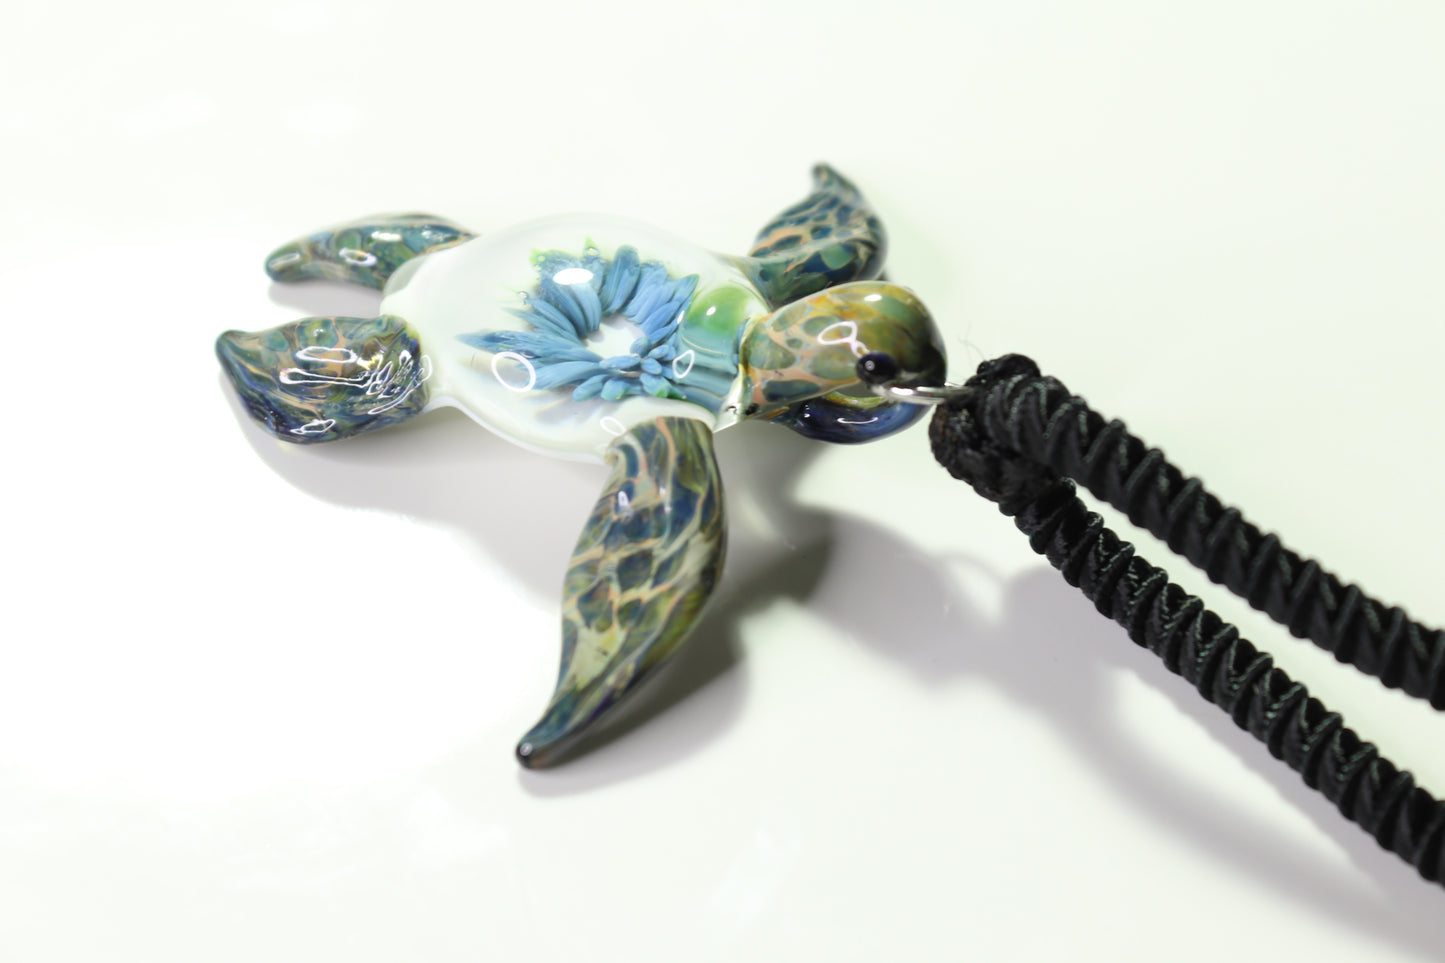 "Great Barrier Reef Honu Green Sea Turtle Pendant: Handcrafted Glass with Coral Reef Inside the Shell" - GLASSnFIRE